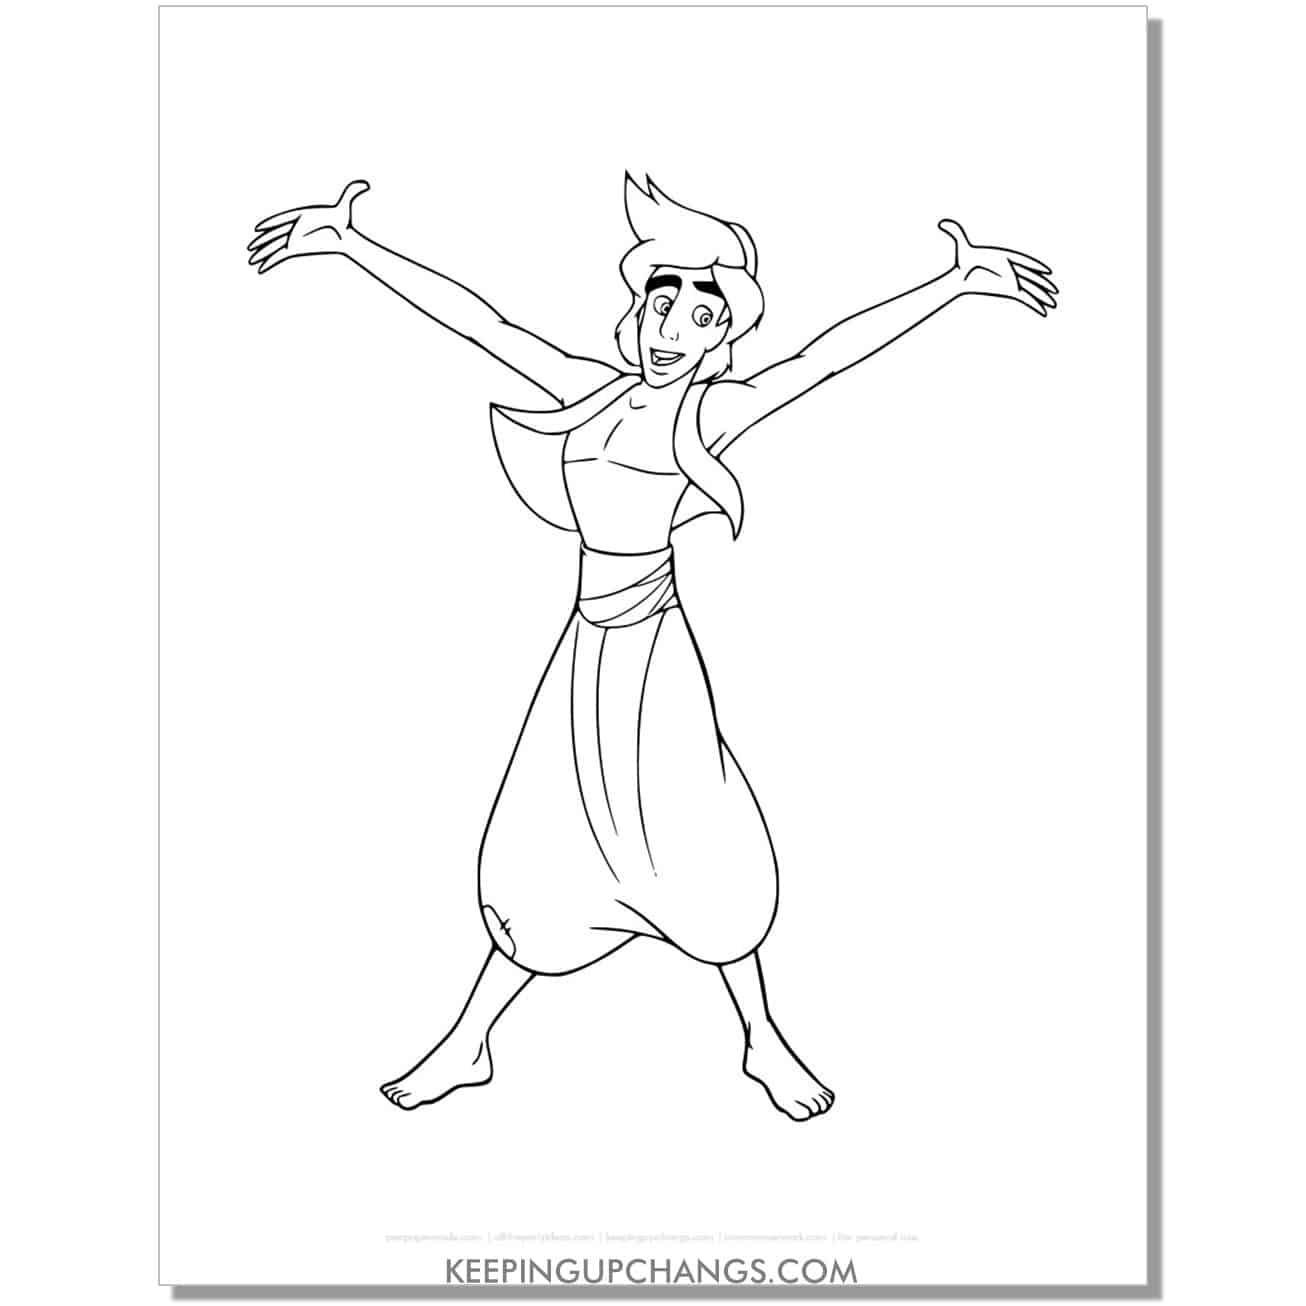 aladdin with arms above head coloring page, sheet.